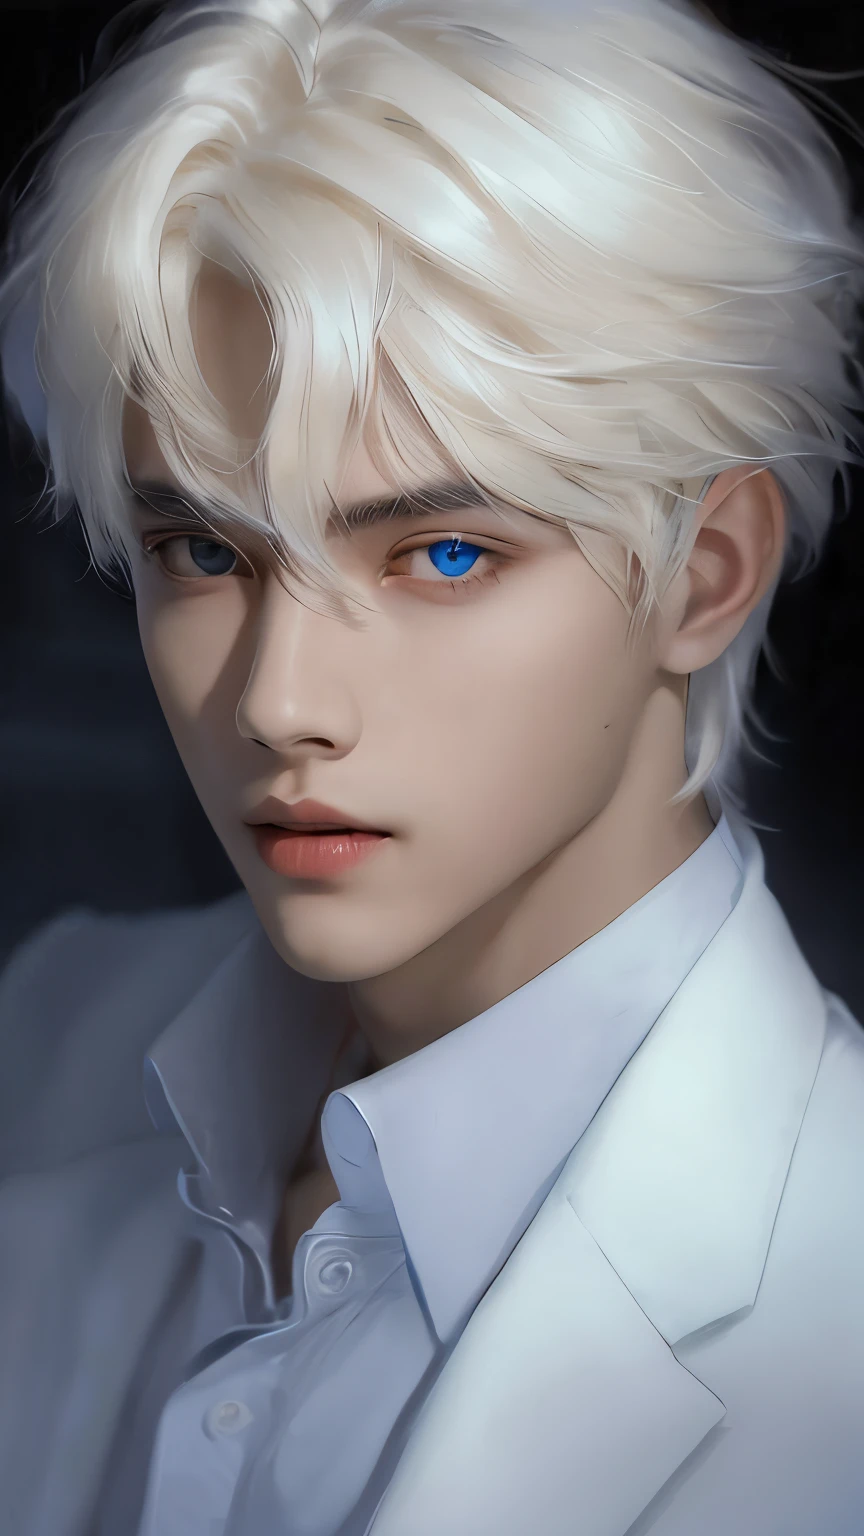 A closeup of a person with white hair and blue eyes, Tall boy with blue eyes, Handsome boy in art, blonde boy with yellow eyes, by Yang J, beautiful androgynous prince, inspired by Yanjun Cheng, awesome anime face portrait, delicate androgynous prince, by Ni Tian, Men&#39;s style, Game of Thrones style